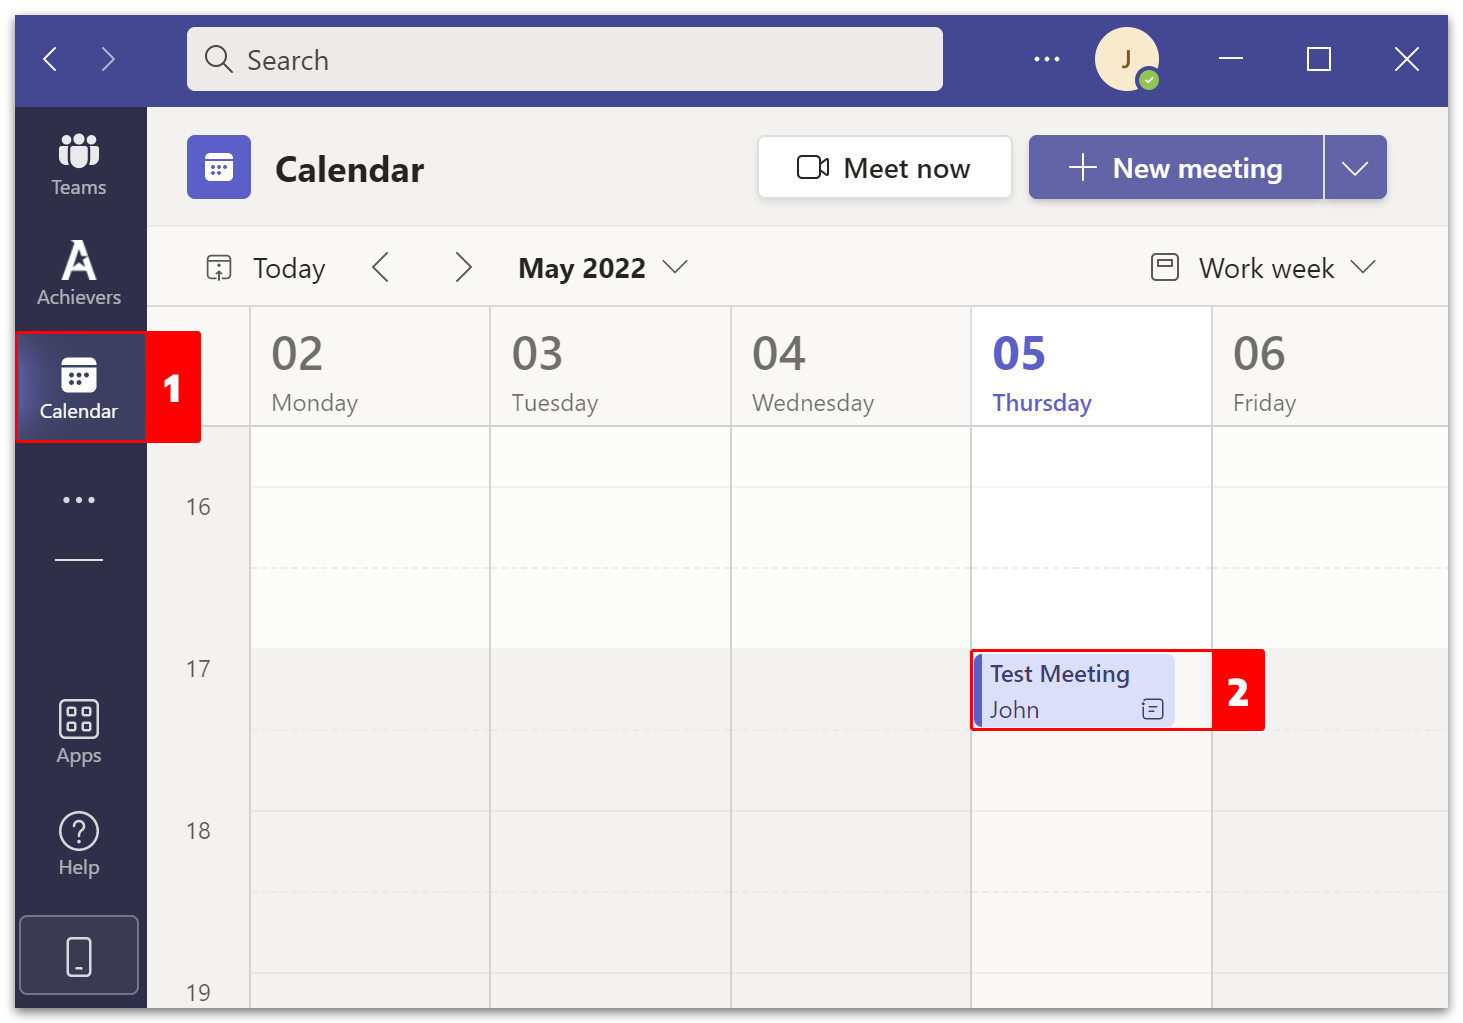 Go to calendar and double-click your meeting.